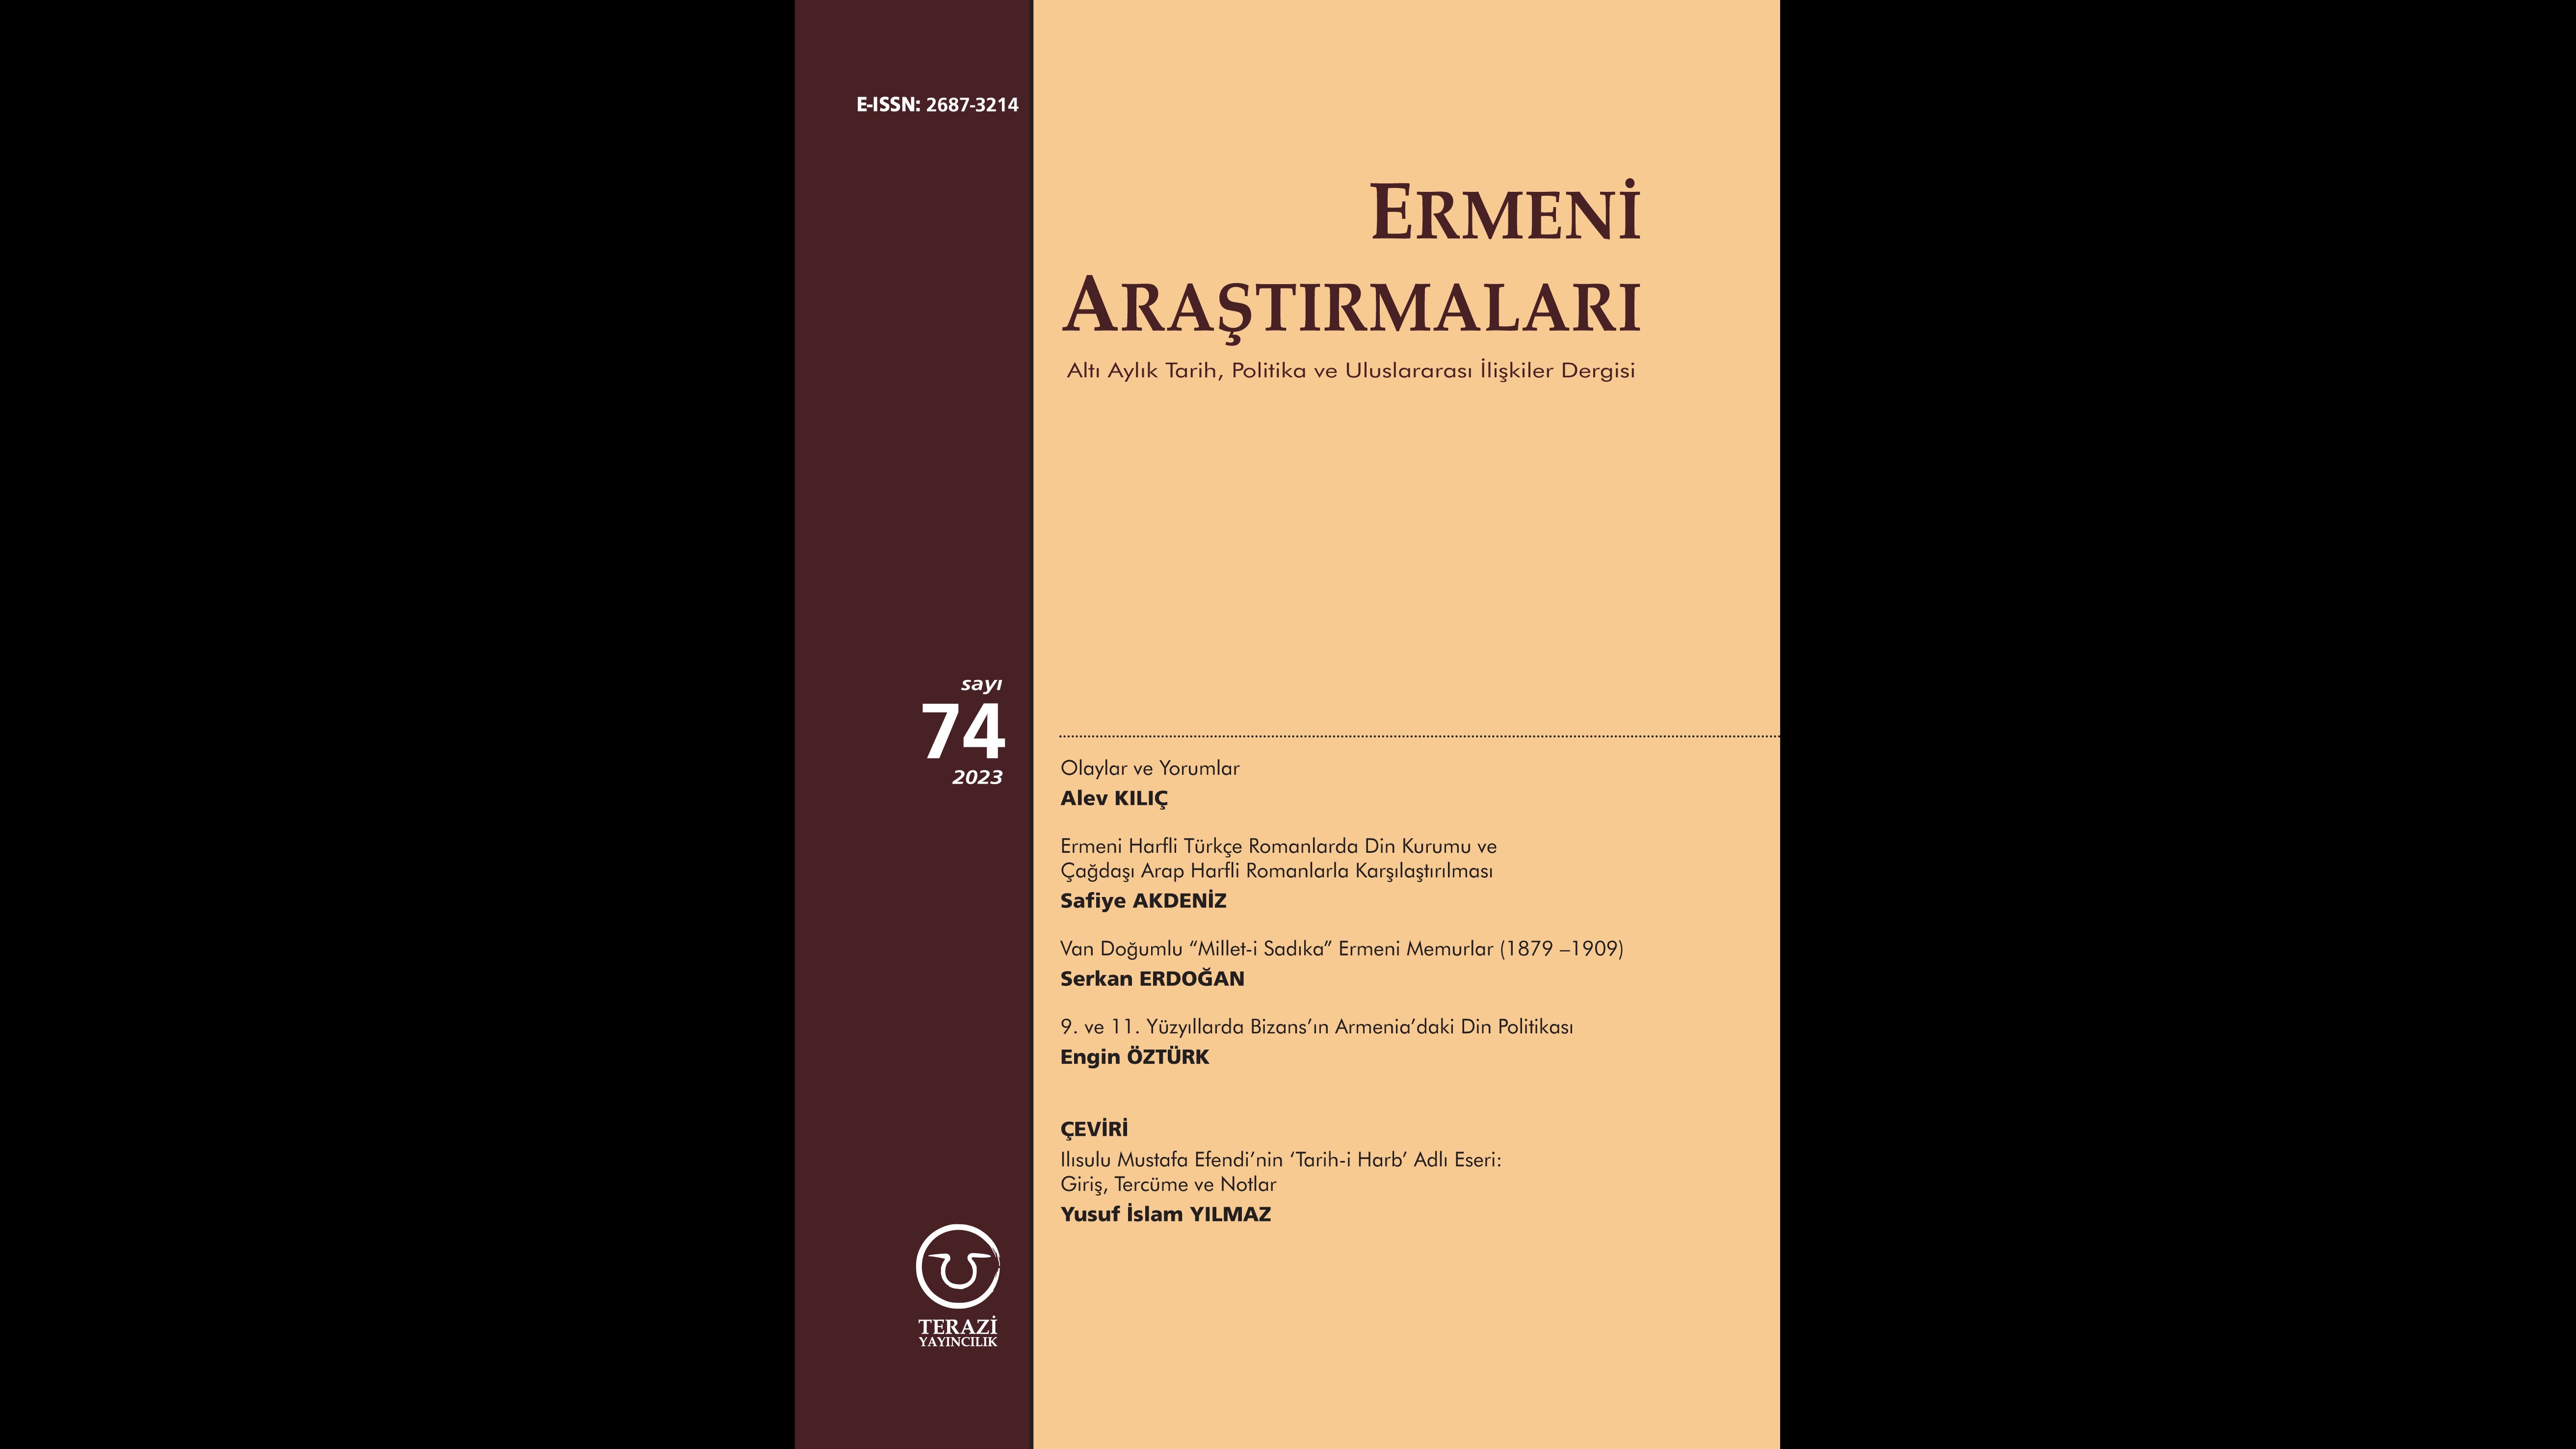 ANNOUNCEMENT: THE 74TH ISSUE OF THE ERMENİ ARAŞTIRMALARI JOURNAL HAS BEEN PUBLISHED